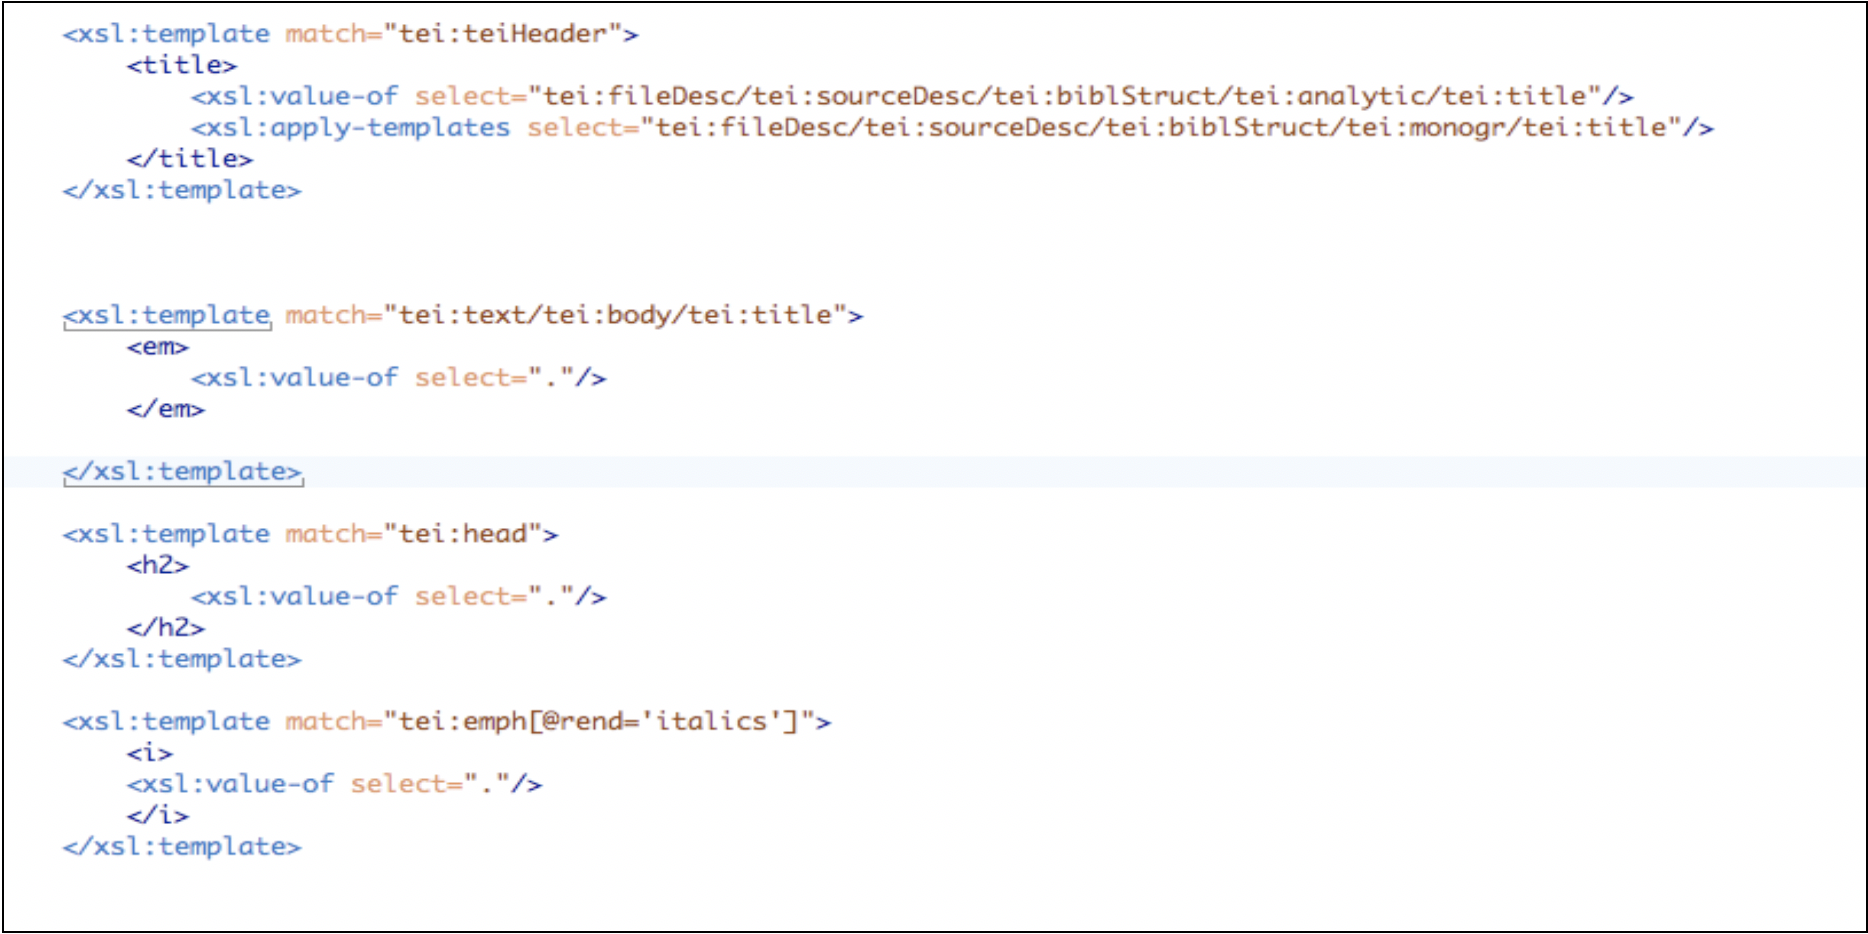 A Screen shot of the xslt used to transform xml into html.